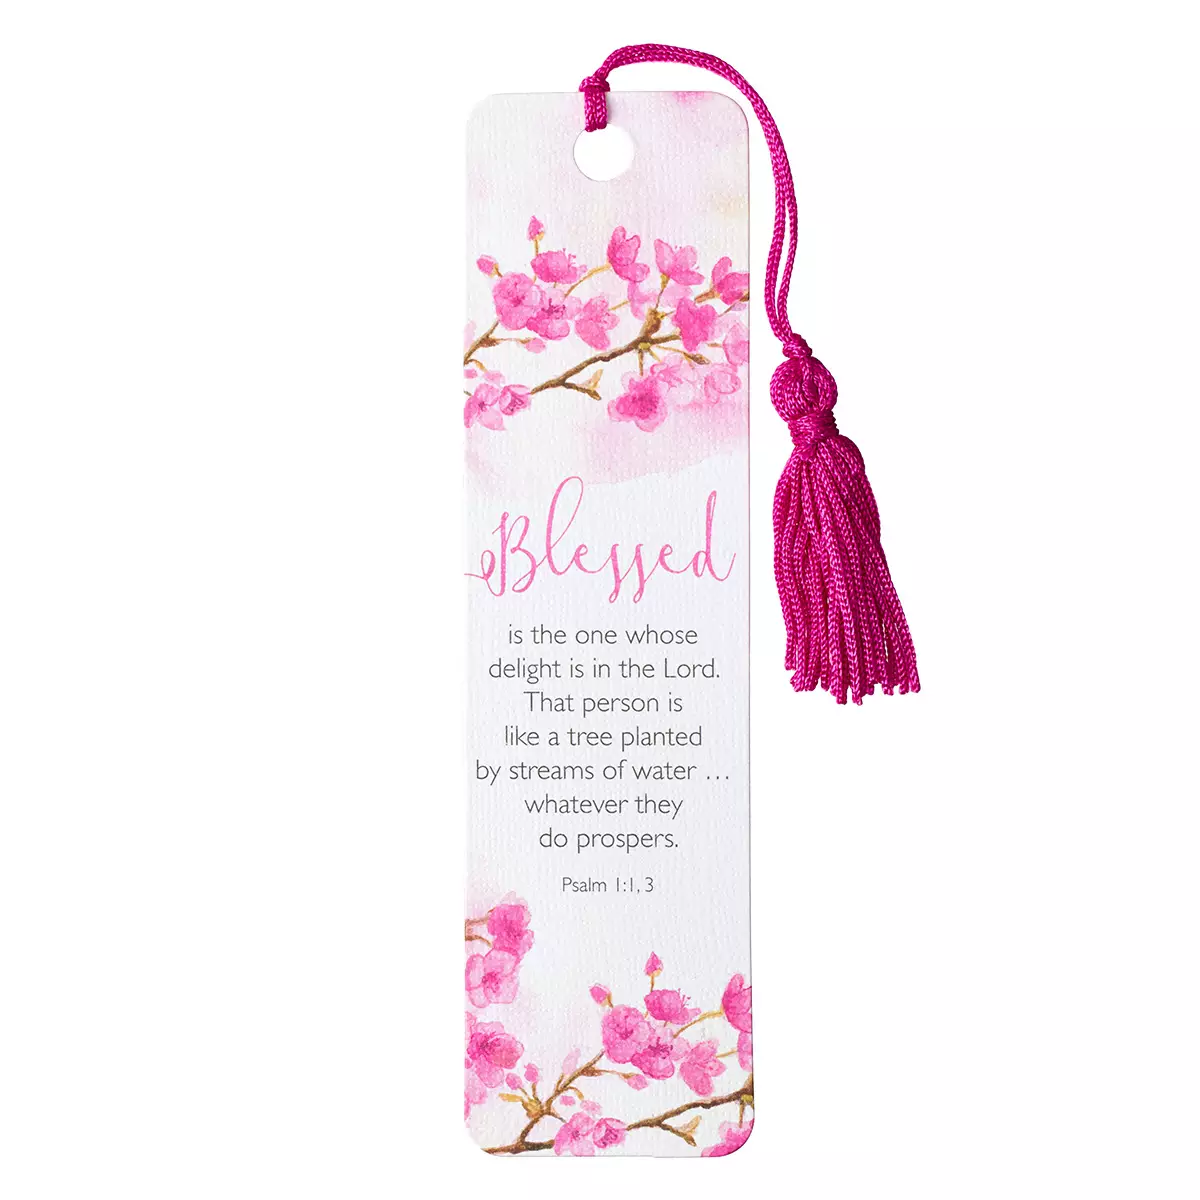 Blessed Bookmark with Tassel - Psalm 1:1-3